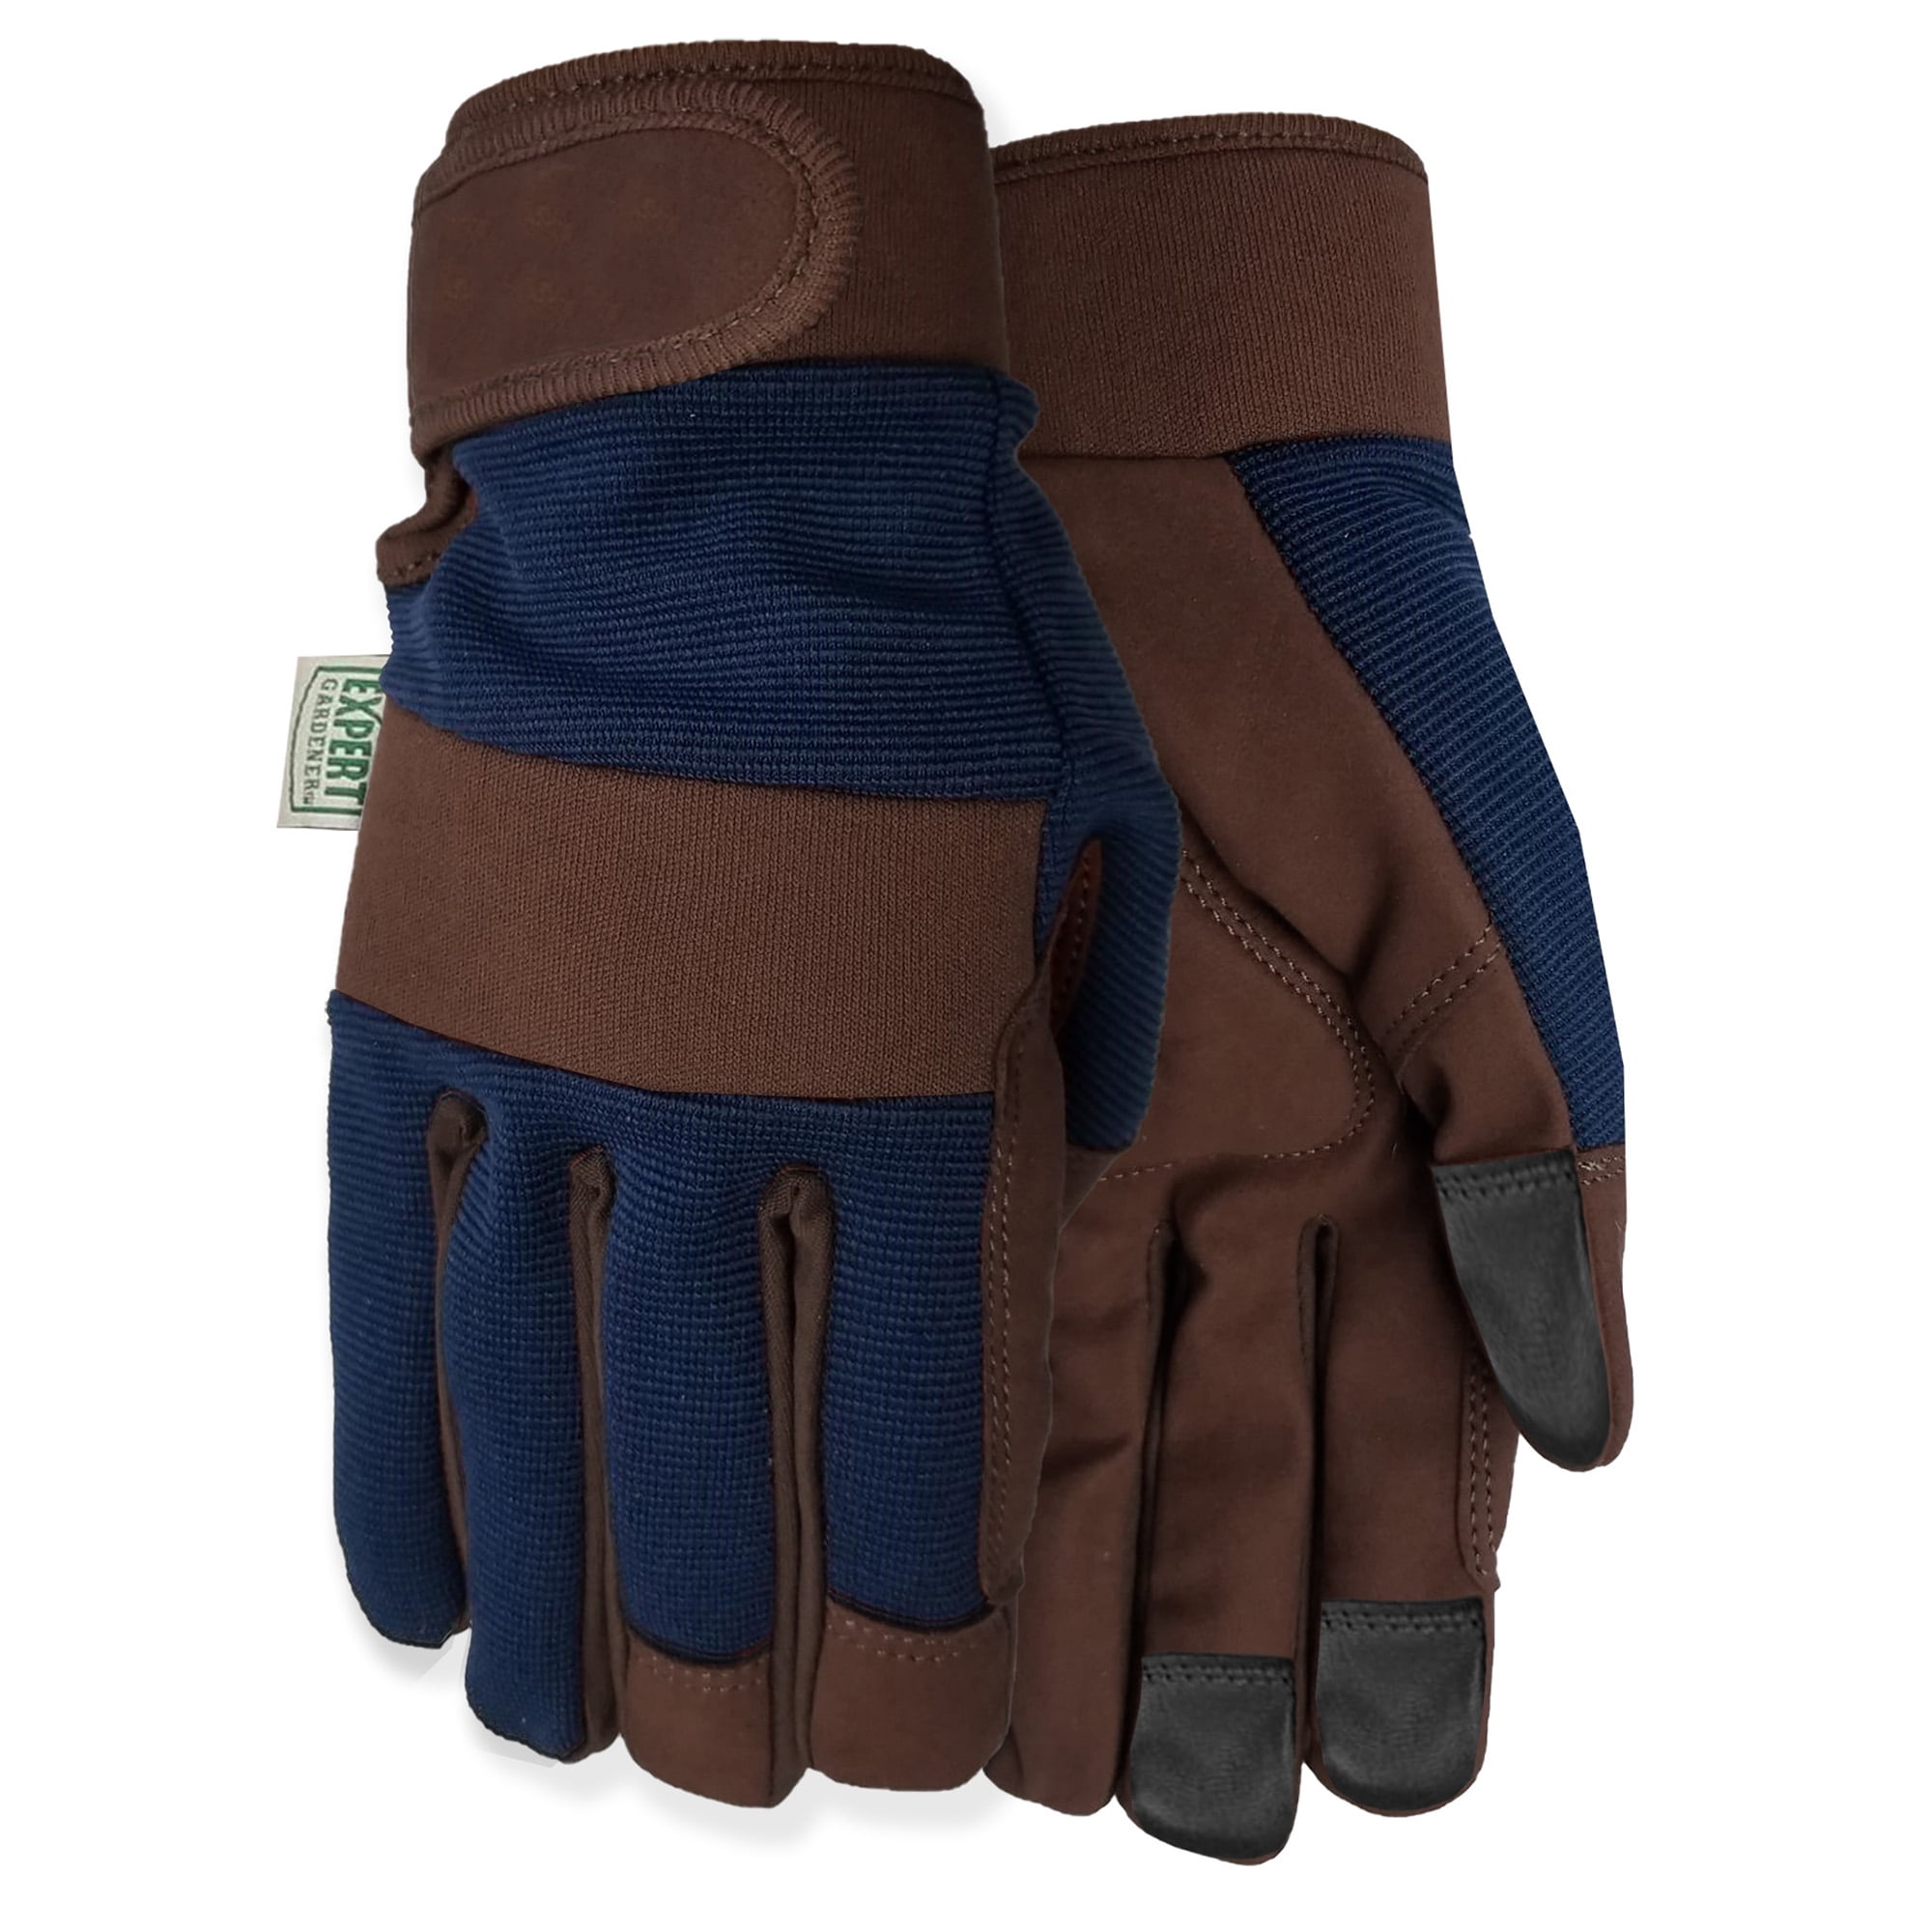 Scotts Landscaping Gloves Heavy Duty Projects Touchscreen Technology Medium NEW 